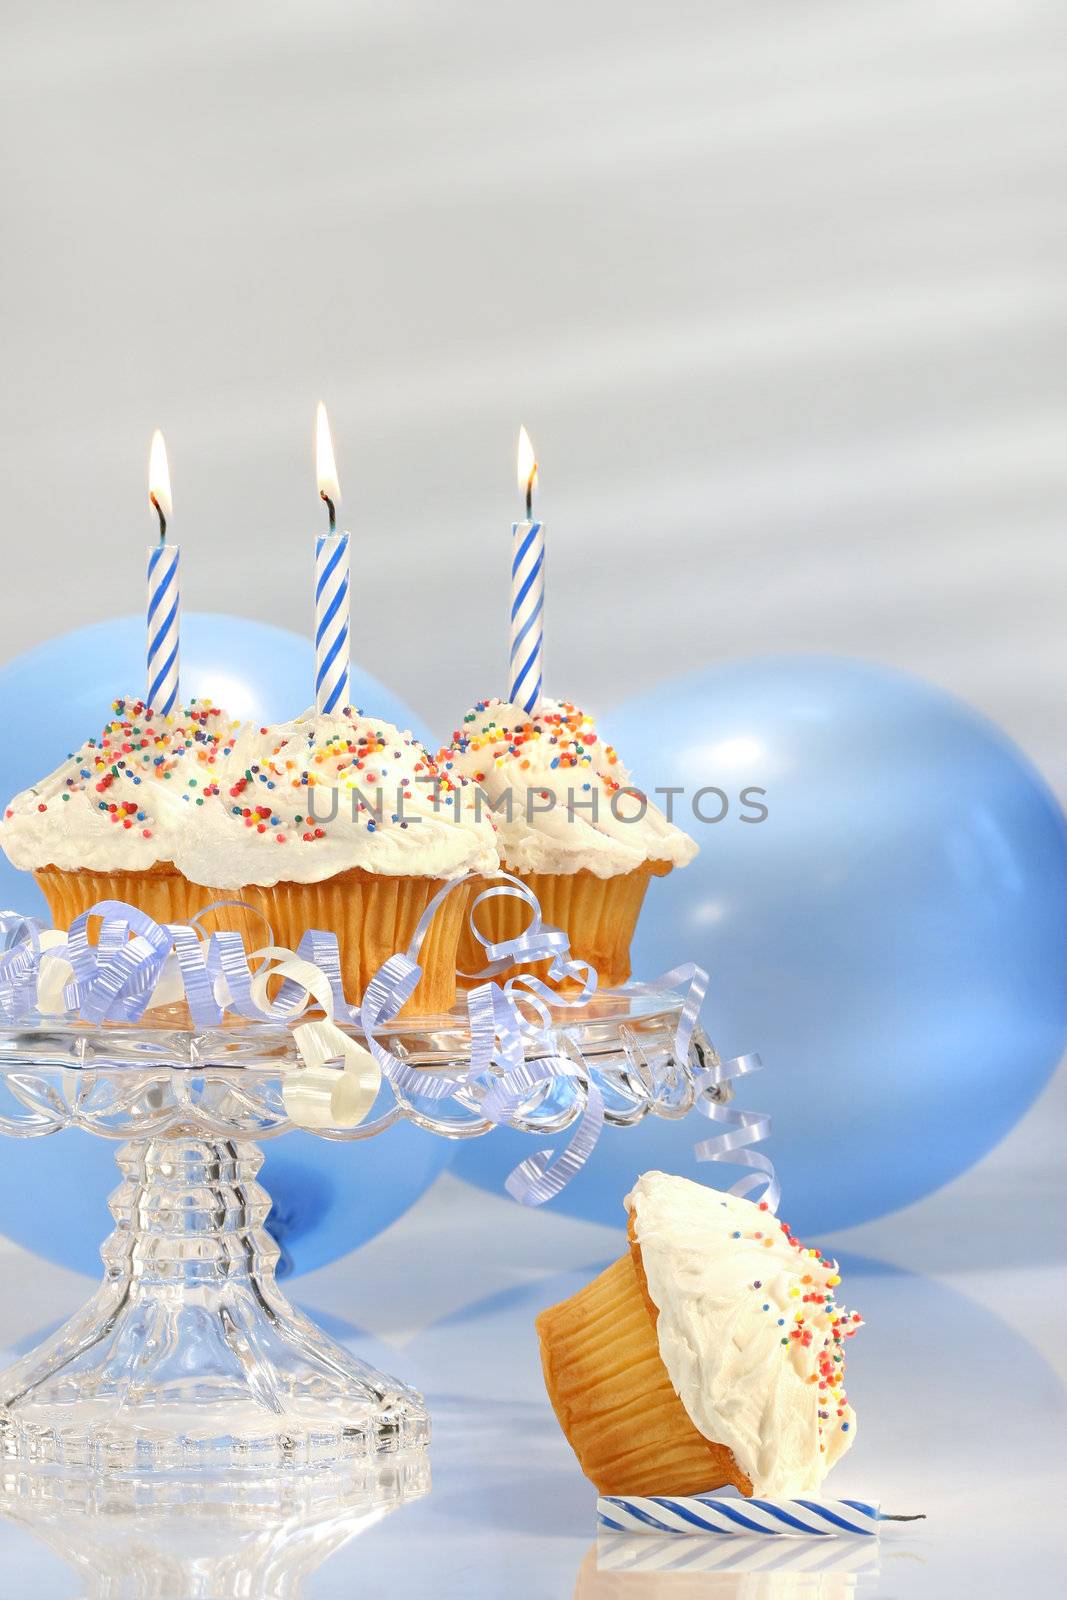 Birthday cupcakes with blue candles by Sandralise